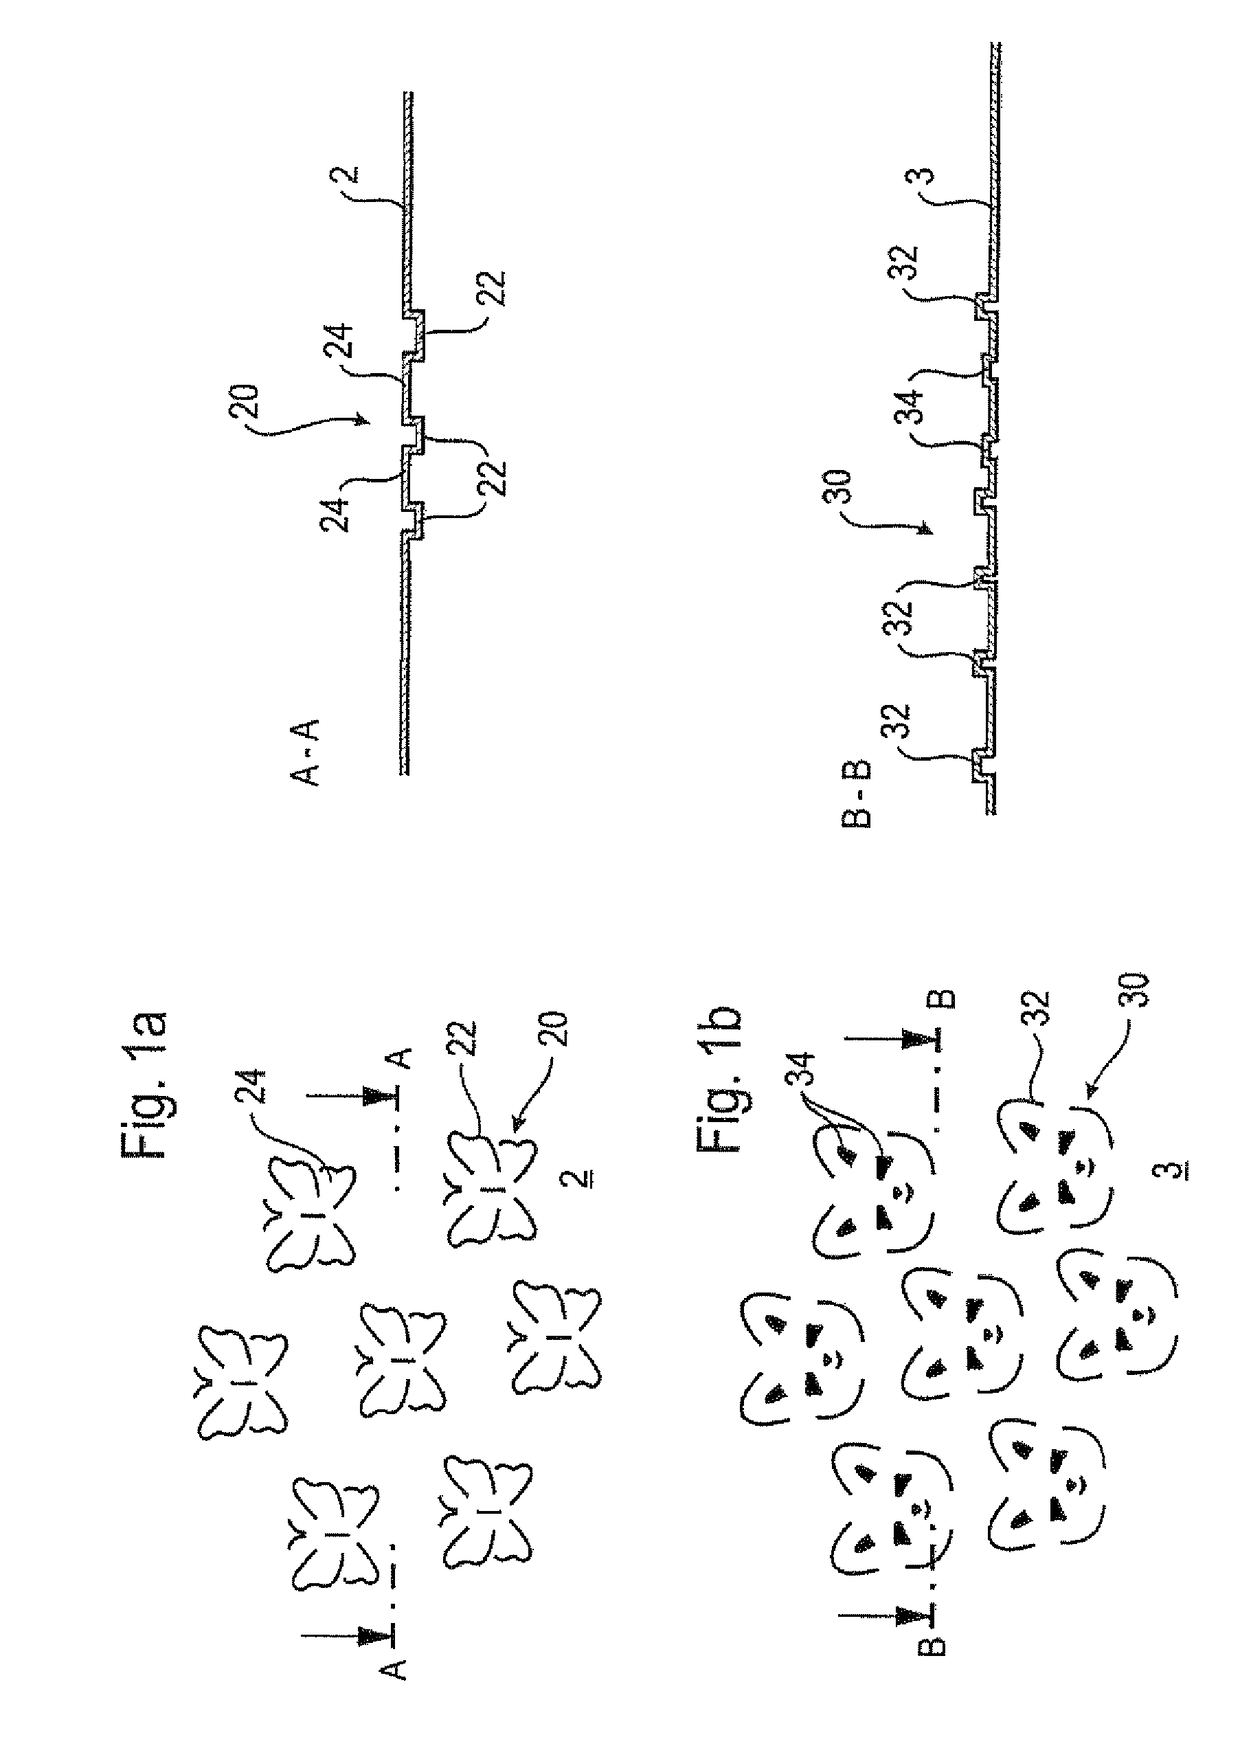 Multi-ply tissue paper product, paper converting device for a multi-ply tissue paper product and method for producing a multi-ply tissue paper product